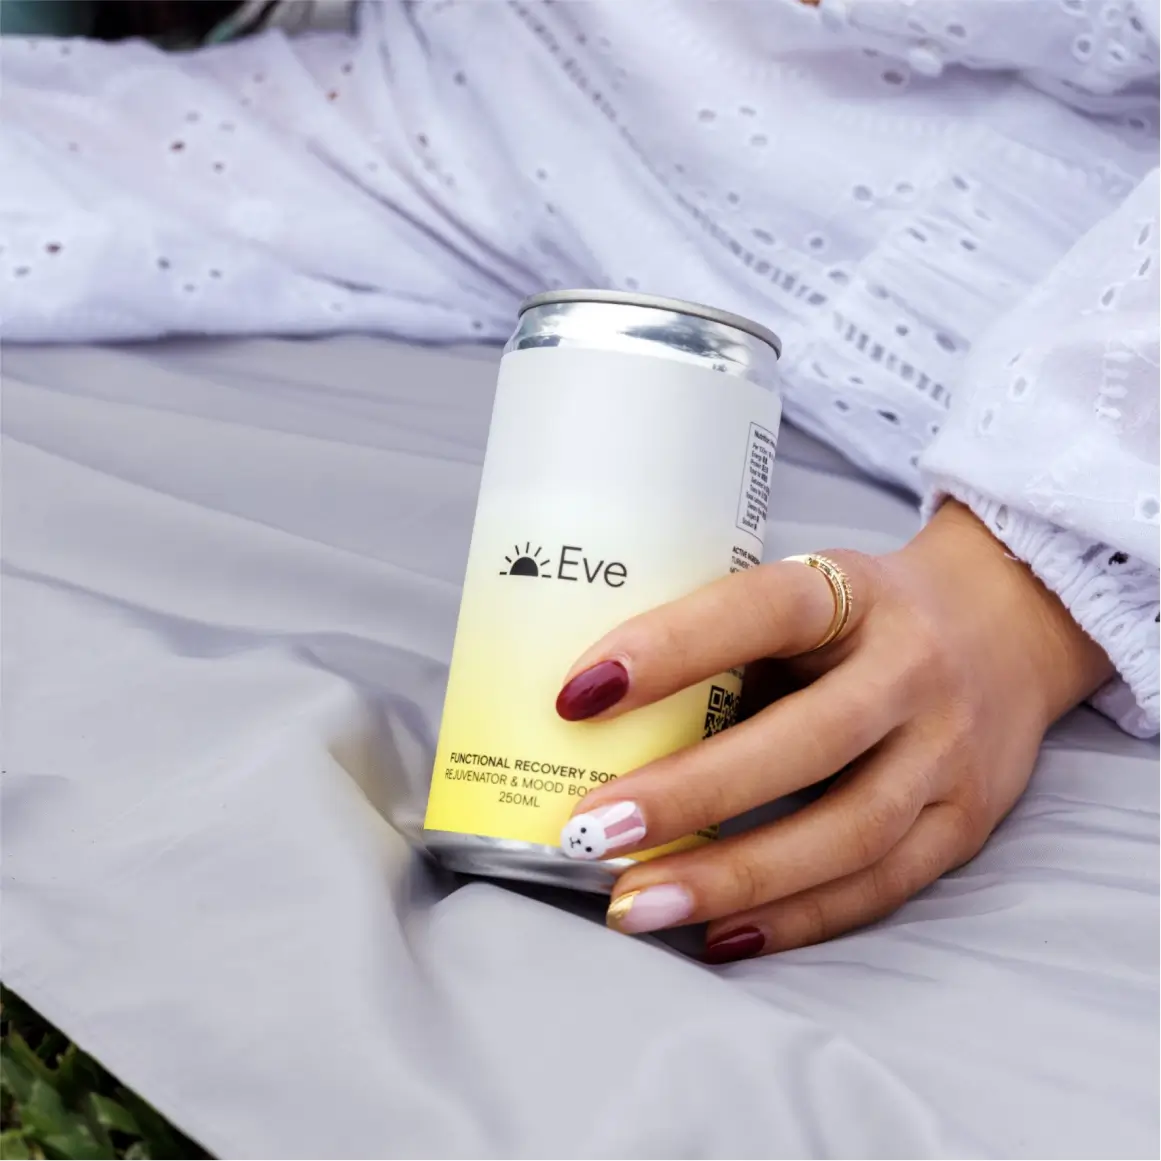 eve bliss press page drinks can